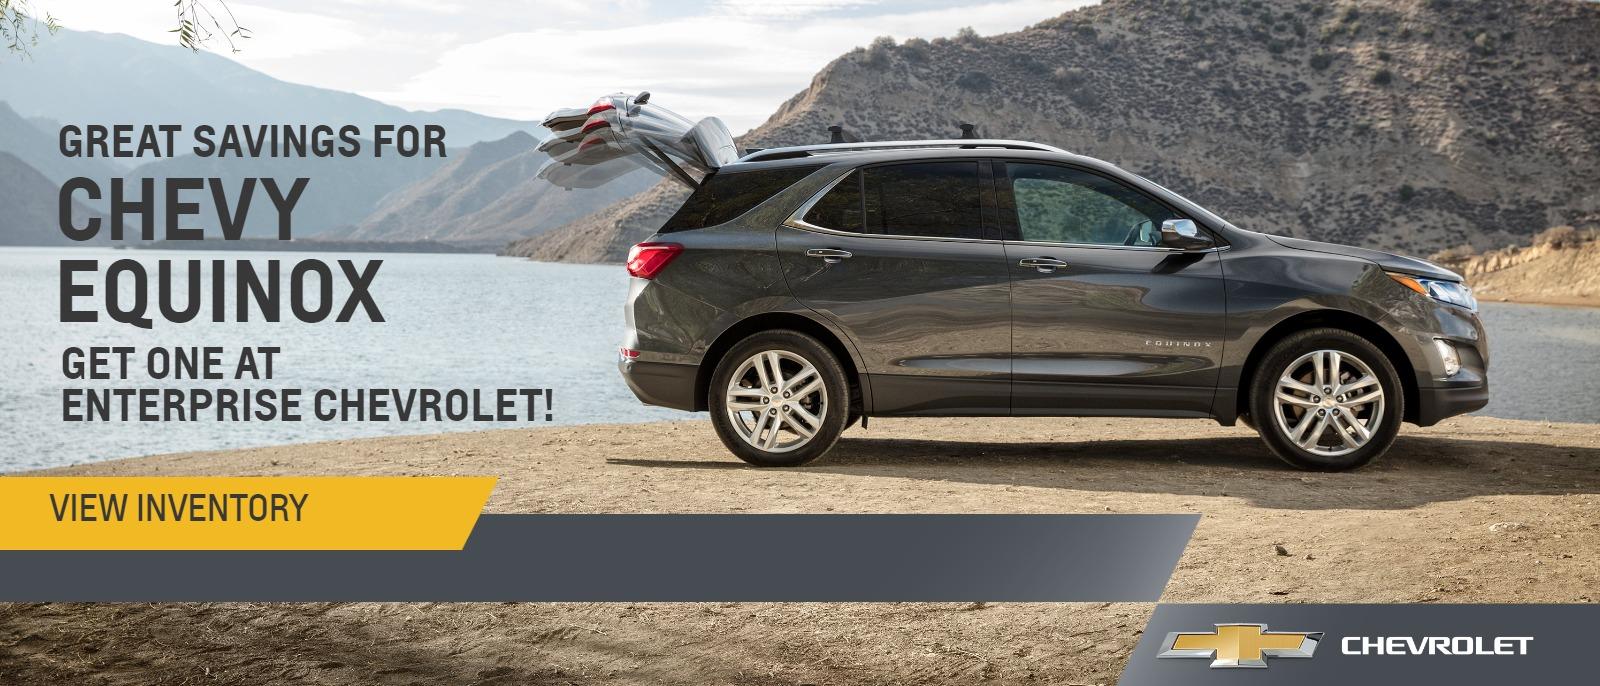 Great savings for Chevy Equinox. Get one at Enterprise Chevrolet!